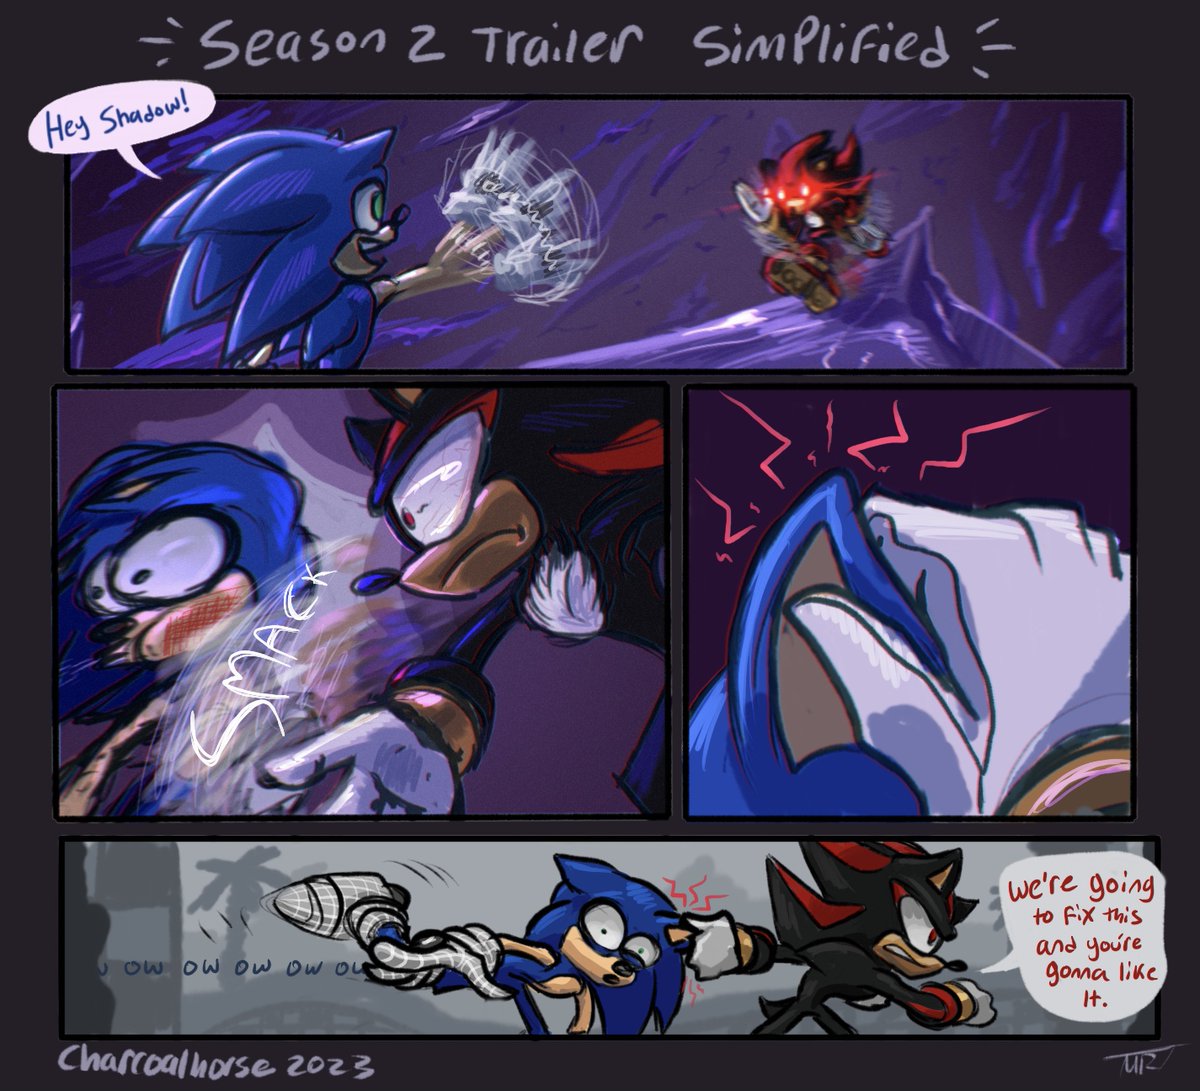 My takeaway from the sonic prime trailer
—-—
#SonicTheHedeghog #SonicPrime #ShadowTheHedgehog